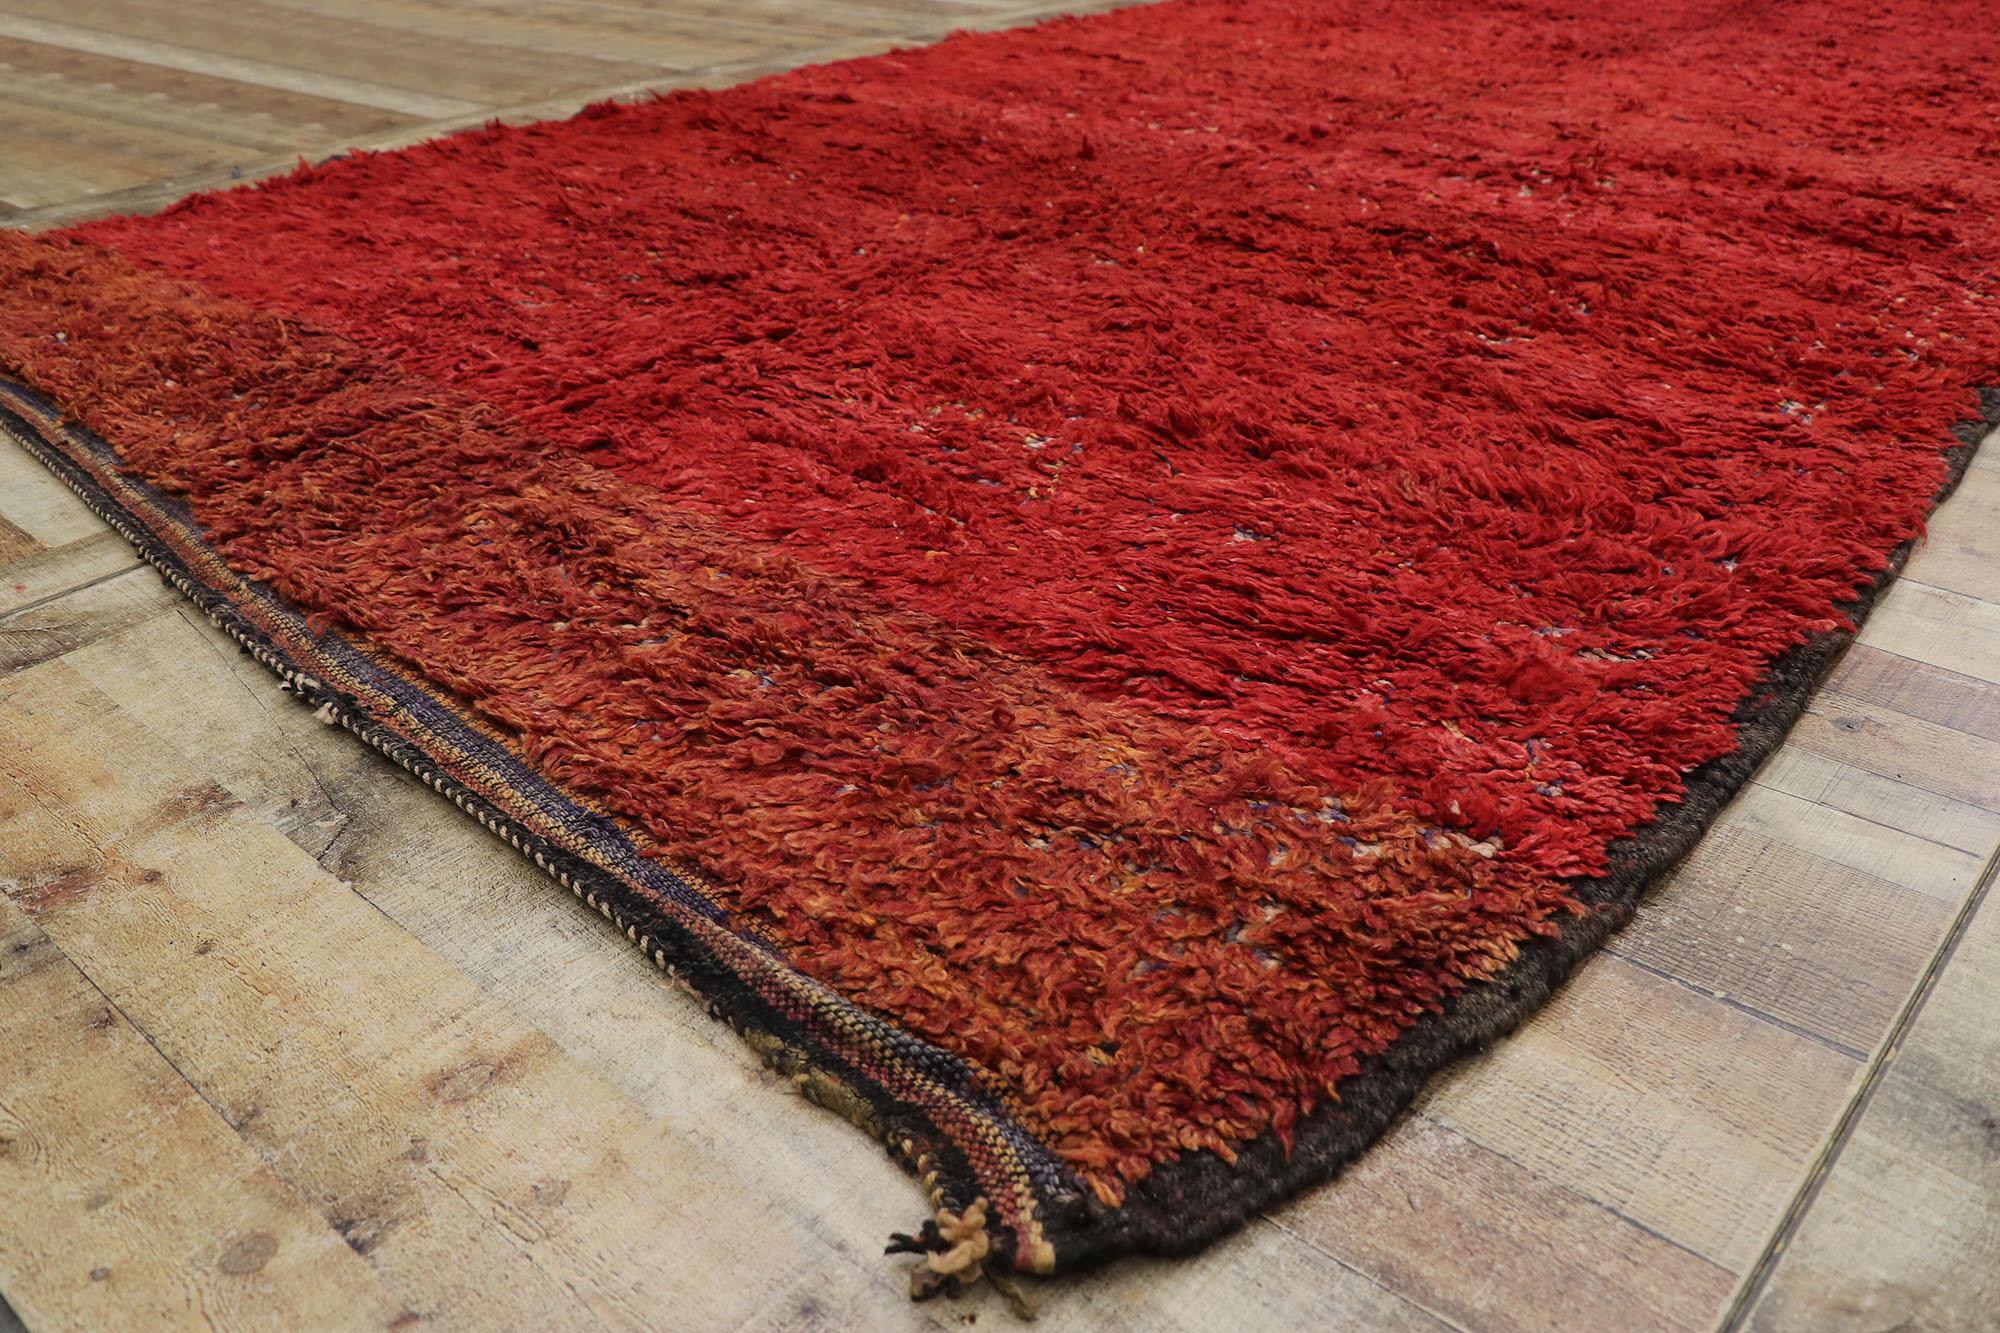 Wool Vintage Berber Red Beni M'Guild Moroccan Rug with Tribal Style For Sale